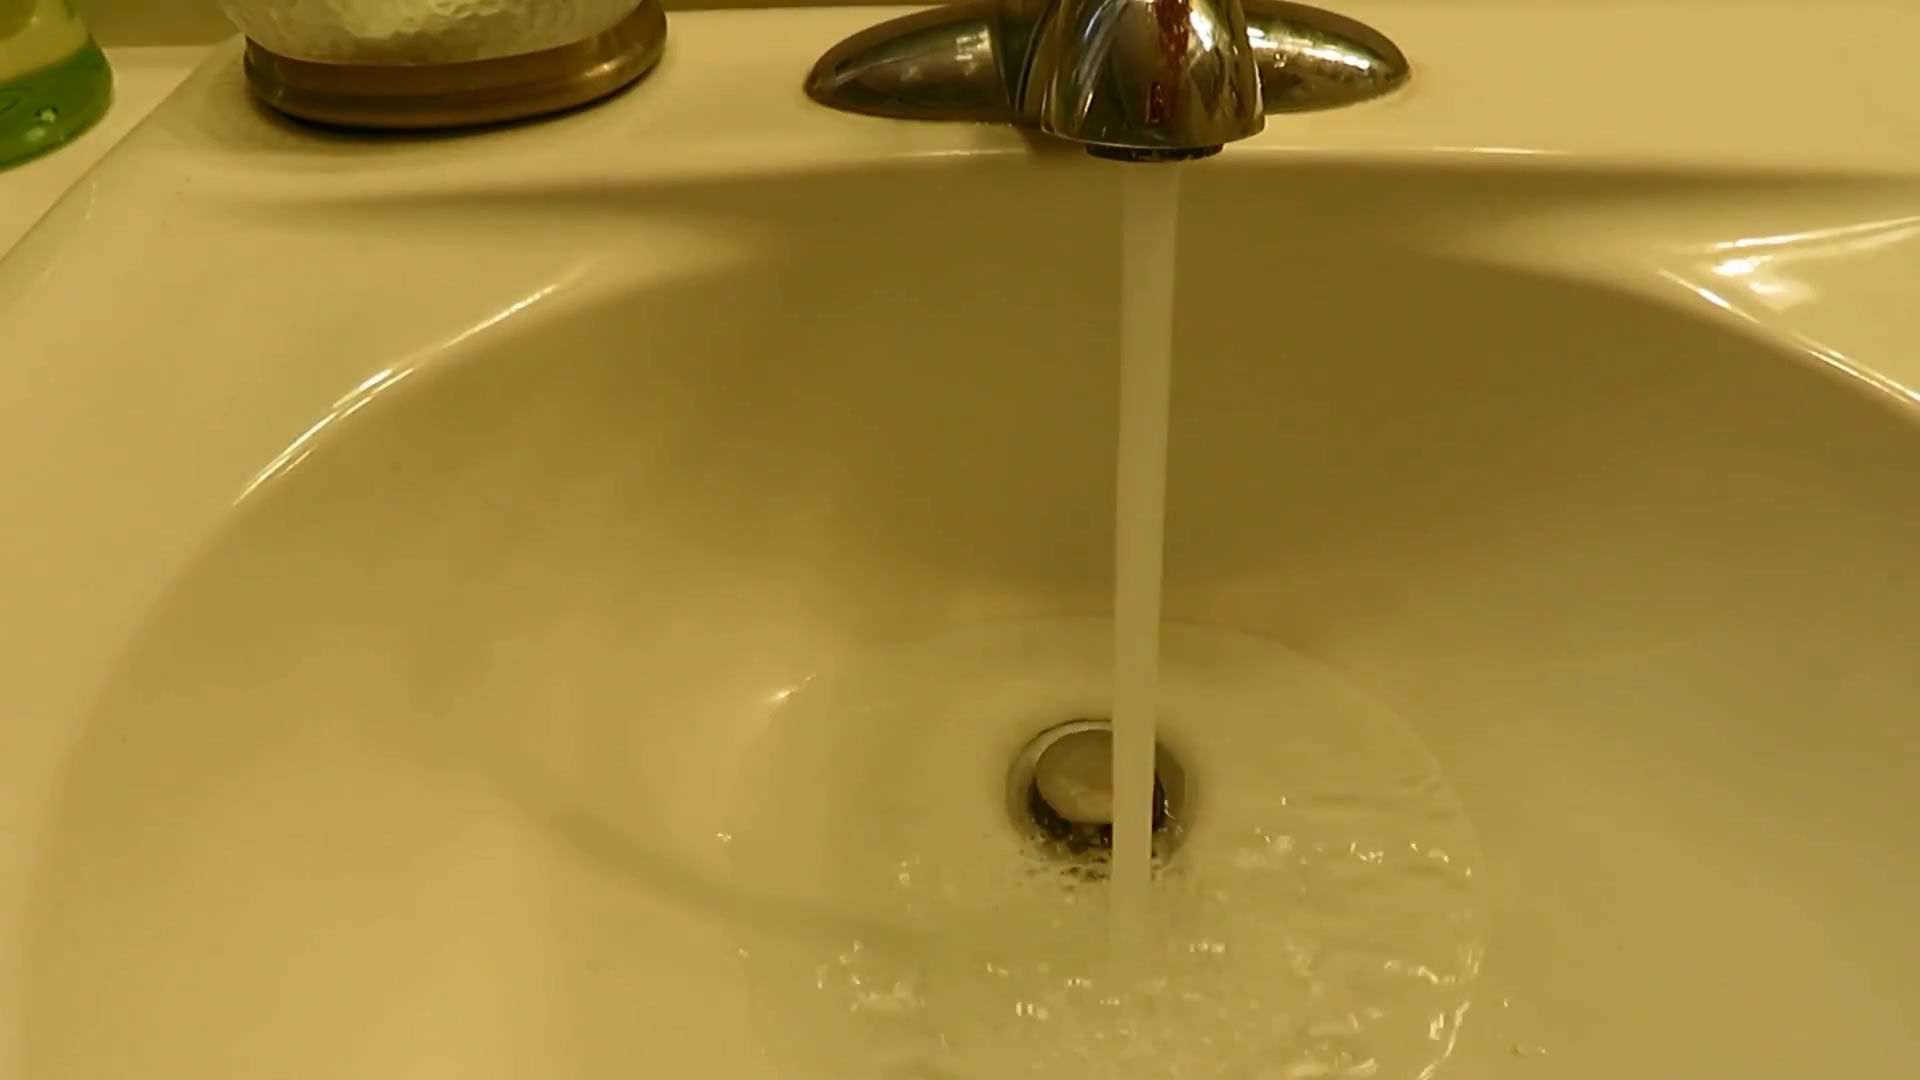 Cleaning Clogged Drains In Sinks Bathtubs Showers And